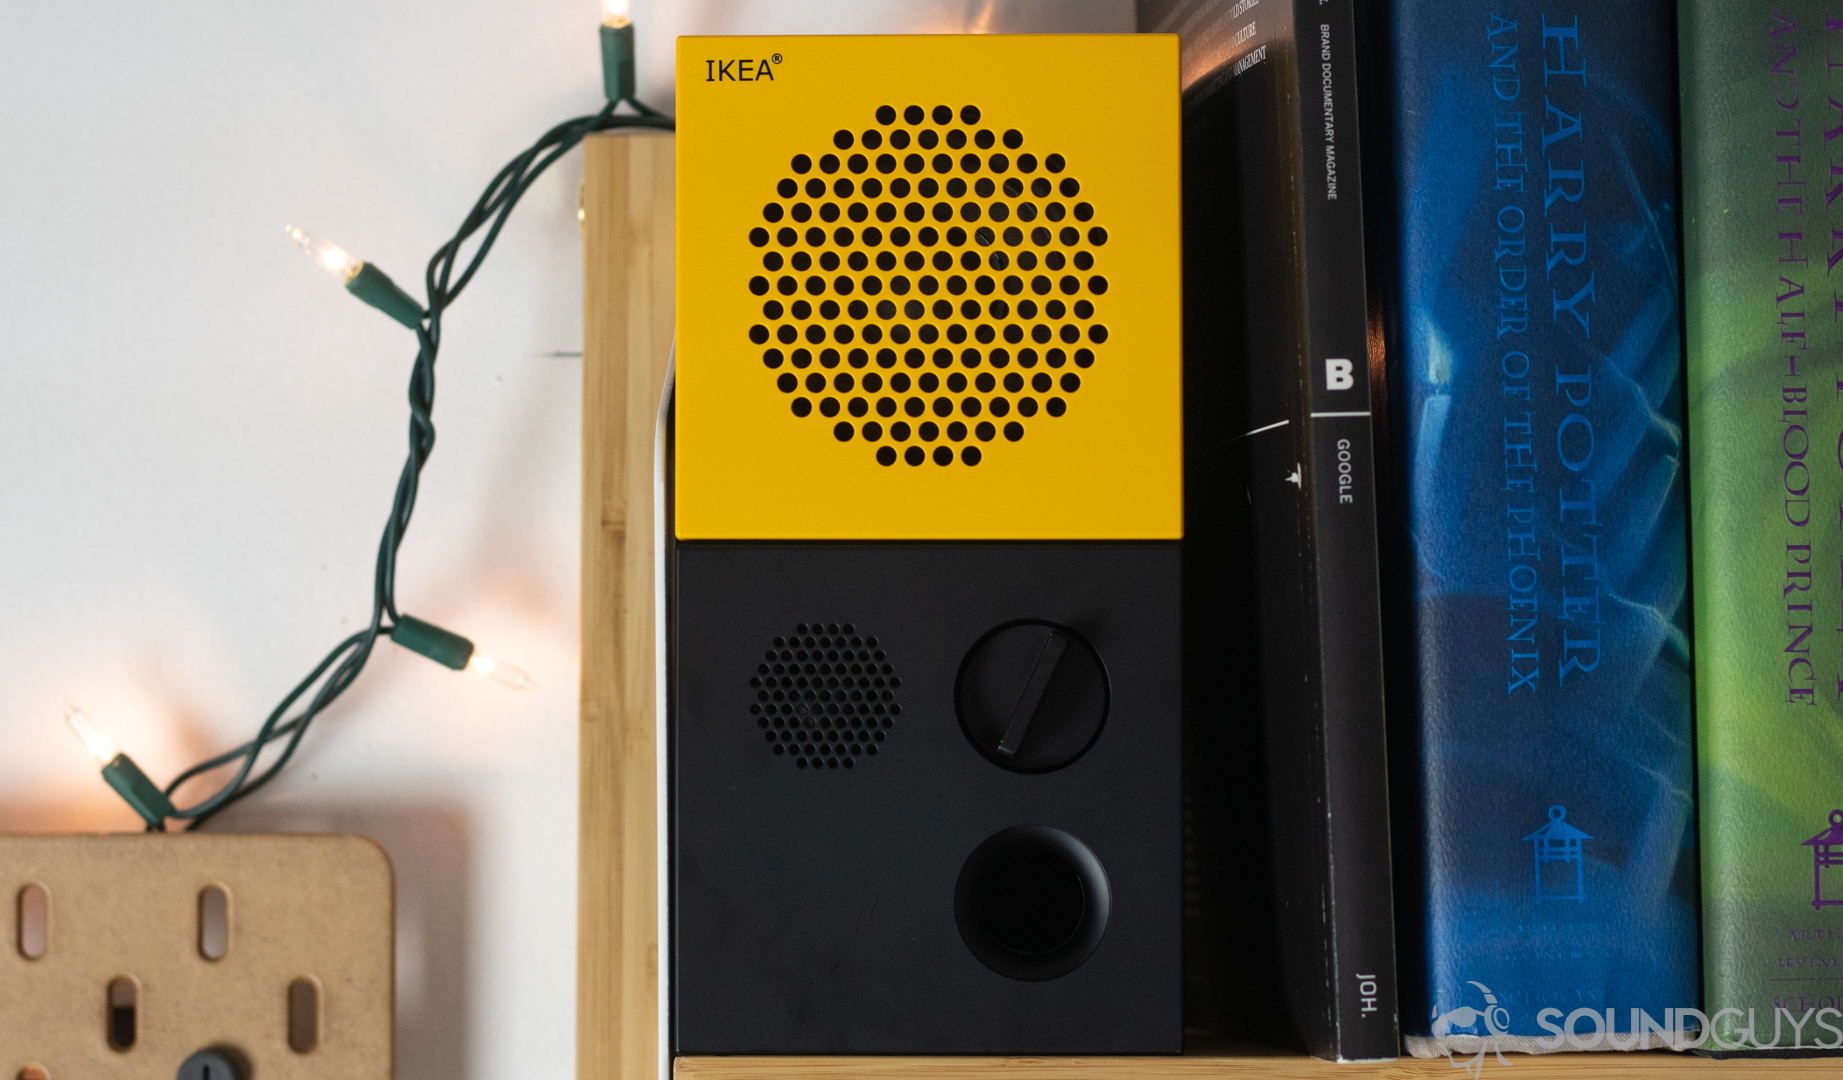 The IKEA x Teenage Engineering Frekvens speaker in yellow on a bookshelf next to Harry Potter books and Christmas lights